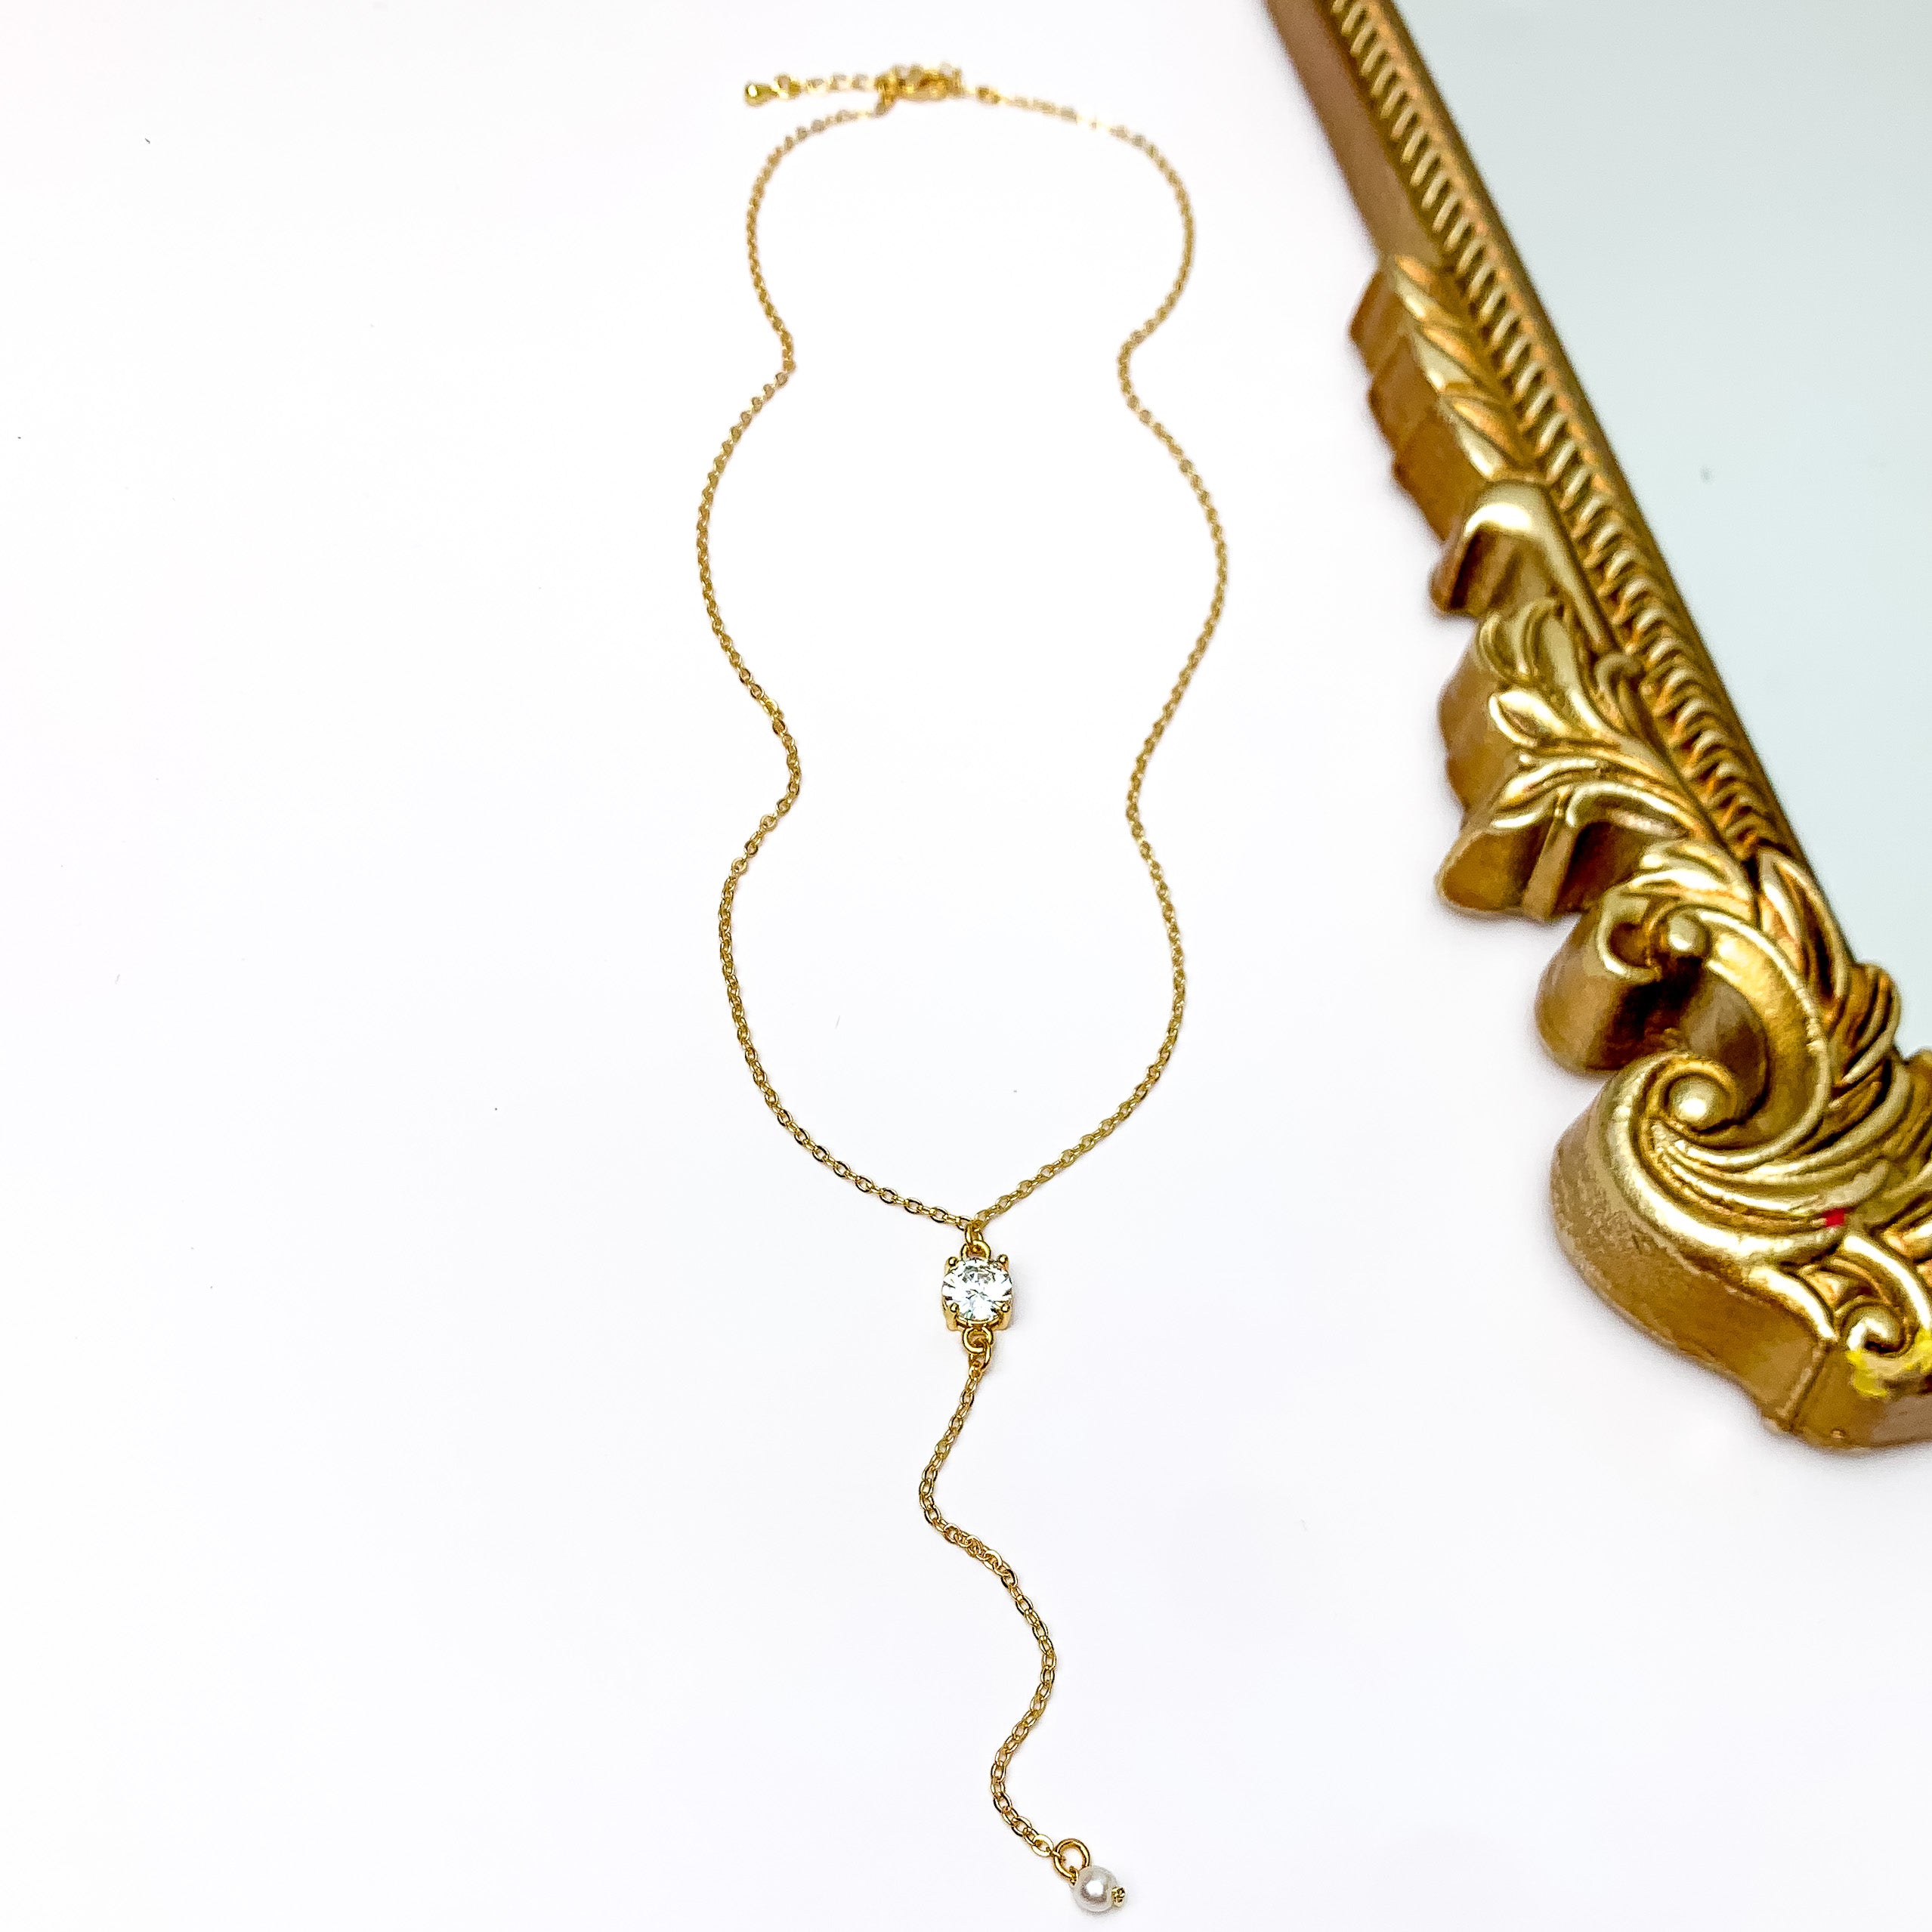 Kinsey Designs | Logan Lariat Necklace with CZ Crystal Pendant - Giddy Up Glamour Boutique